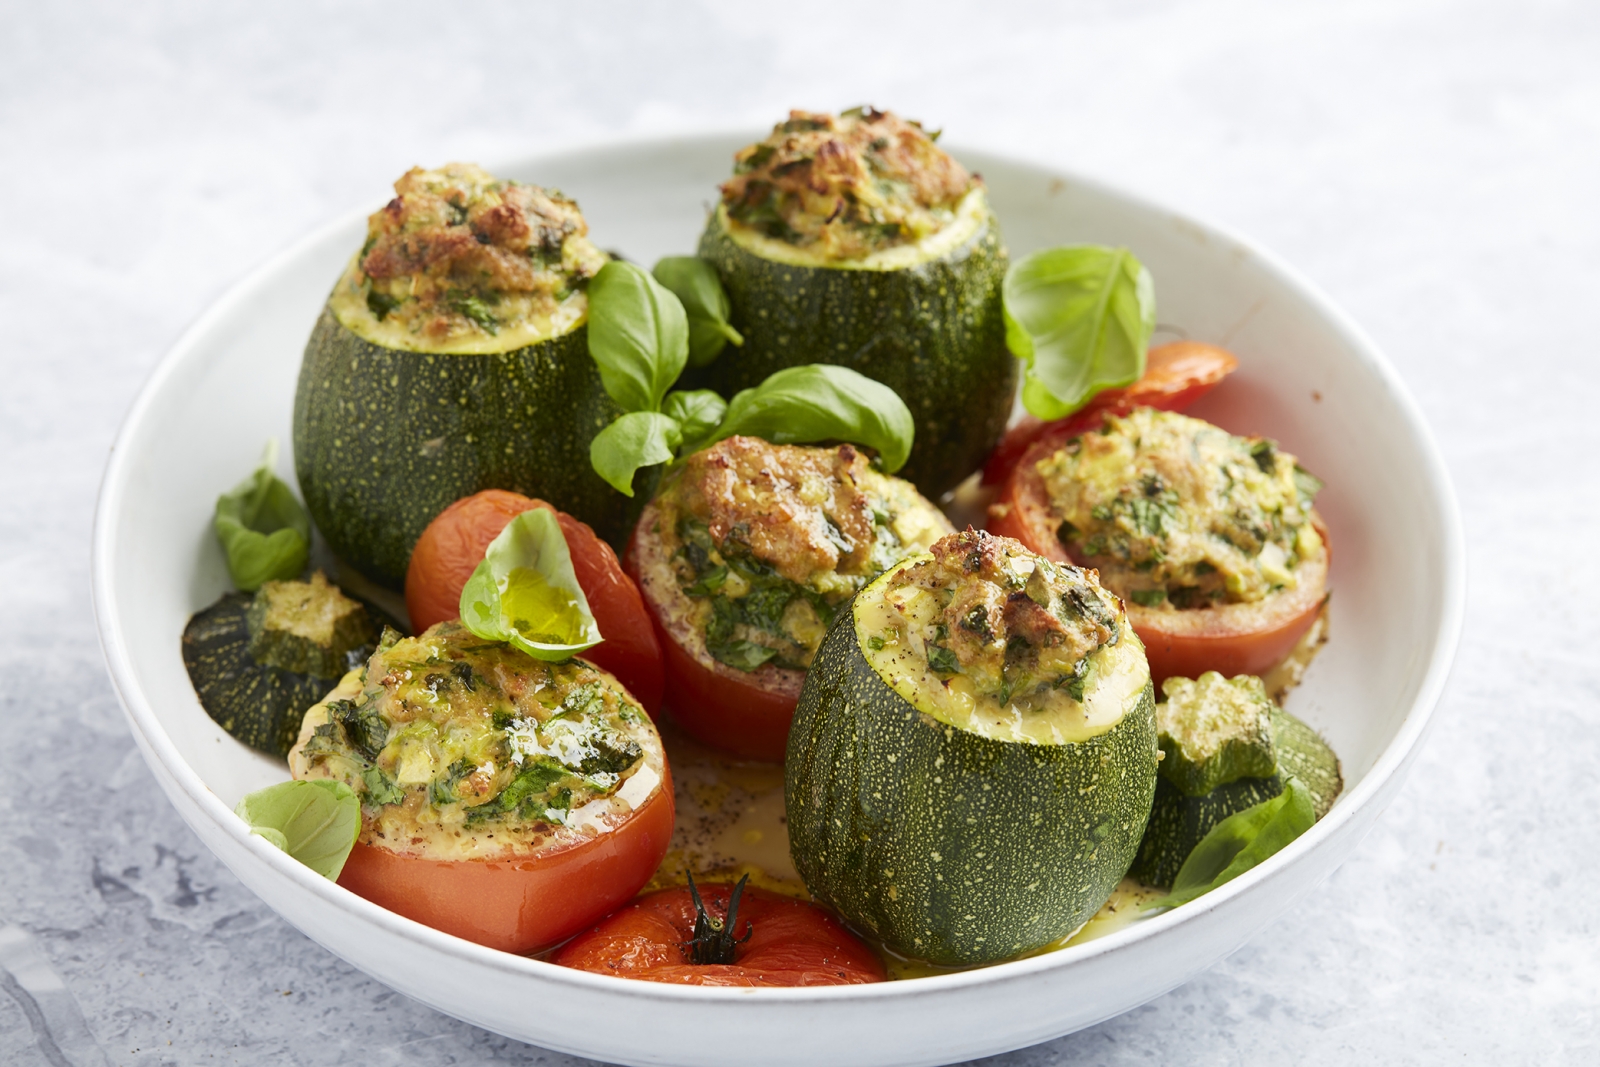 Stuffed Vegetables with Chicken from my low carb cookbook 'Keto in 15 Minuten'